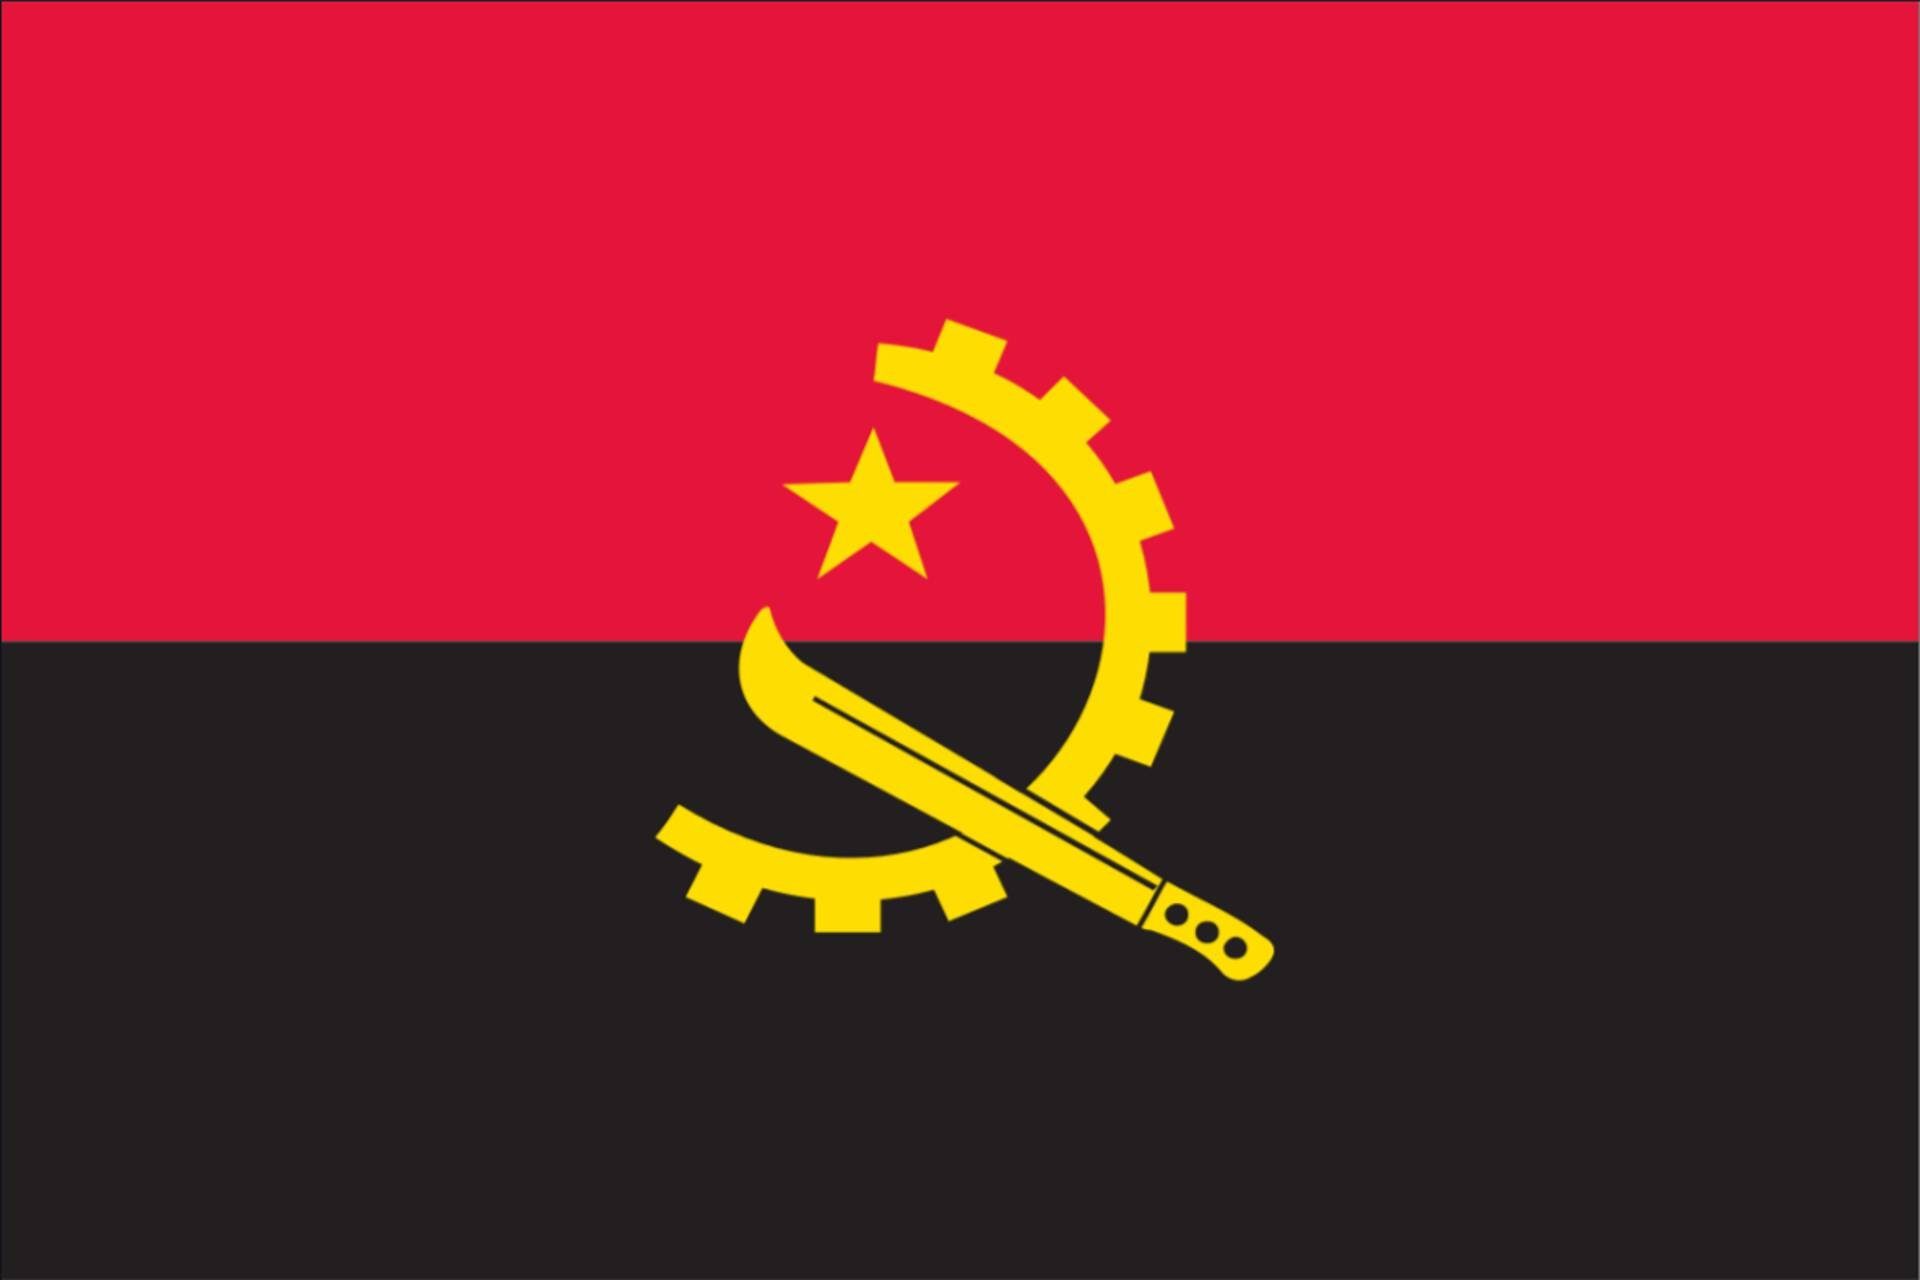 flaggenmeer Flagge Angola 80 g/m²